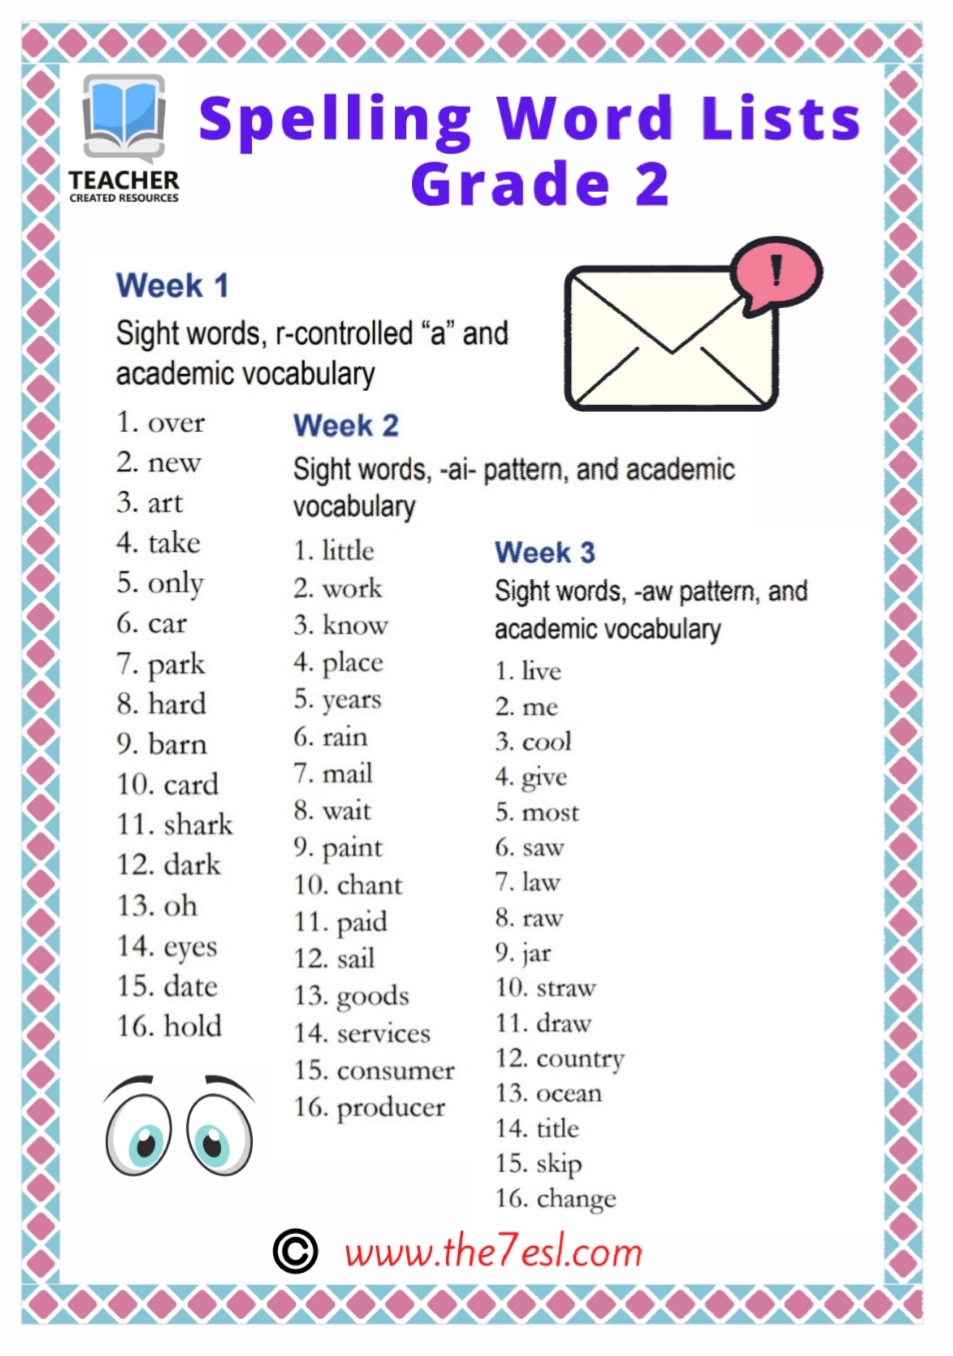 Spelling Word Lists Grade 2 - English Created Resources